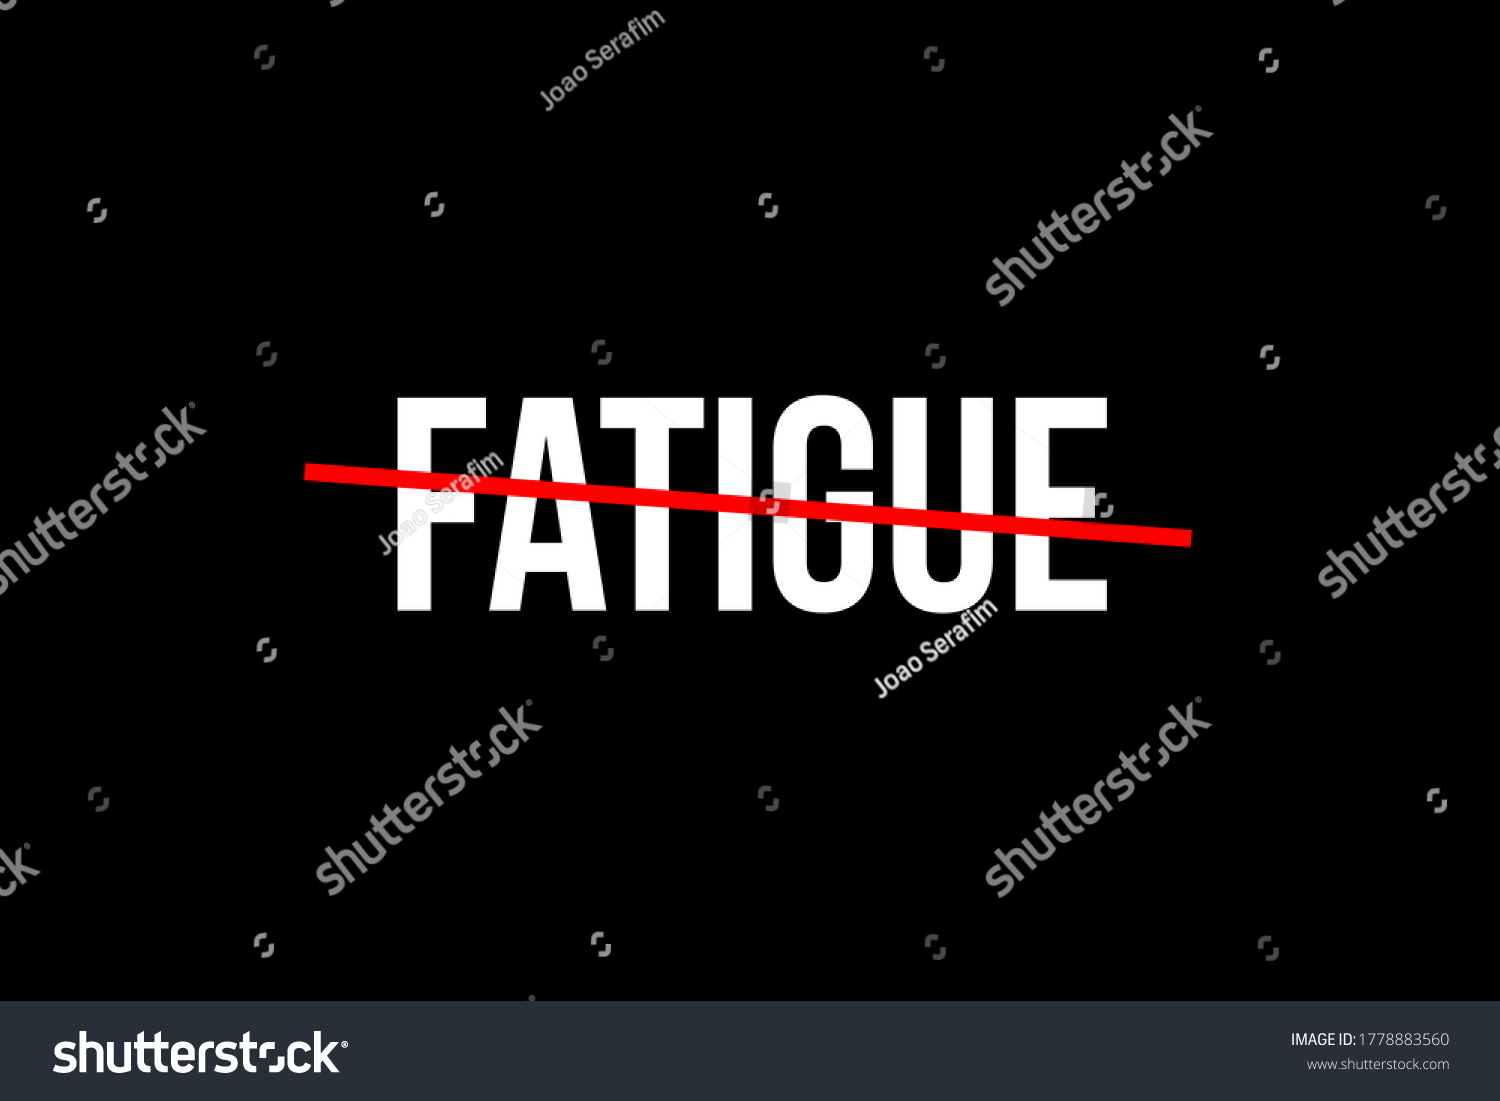 Fatigue meaning